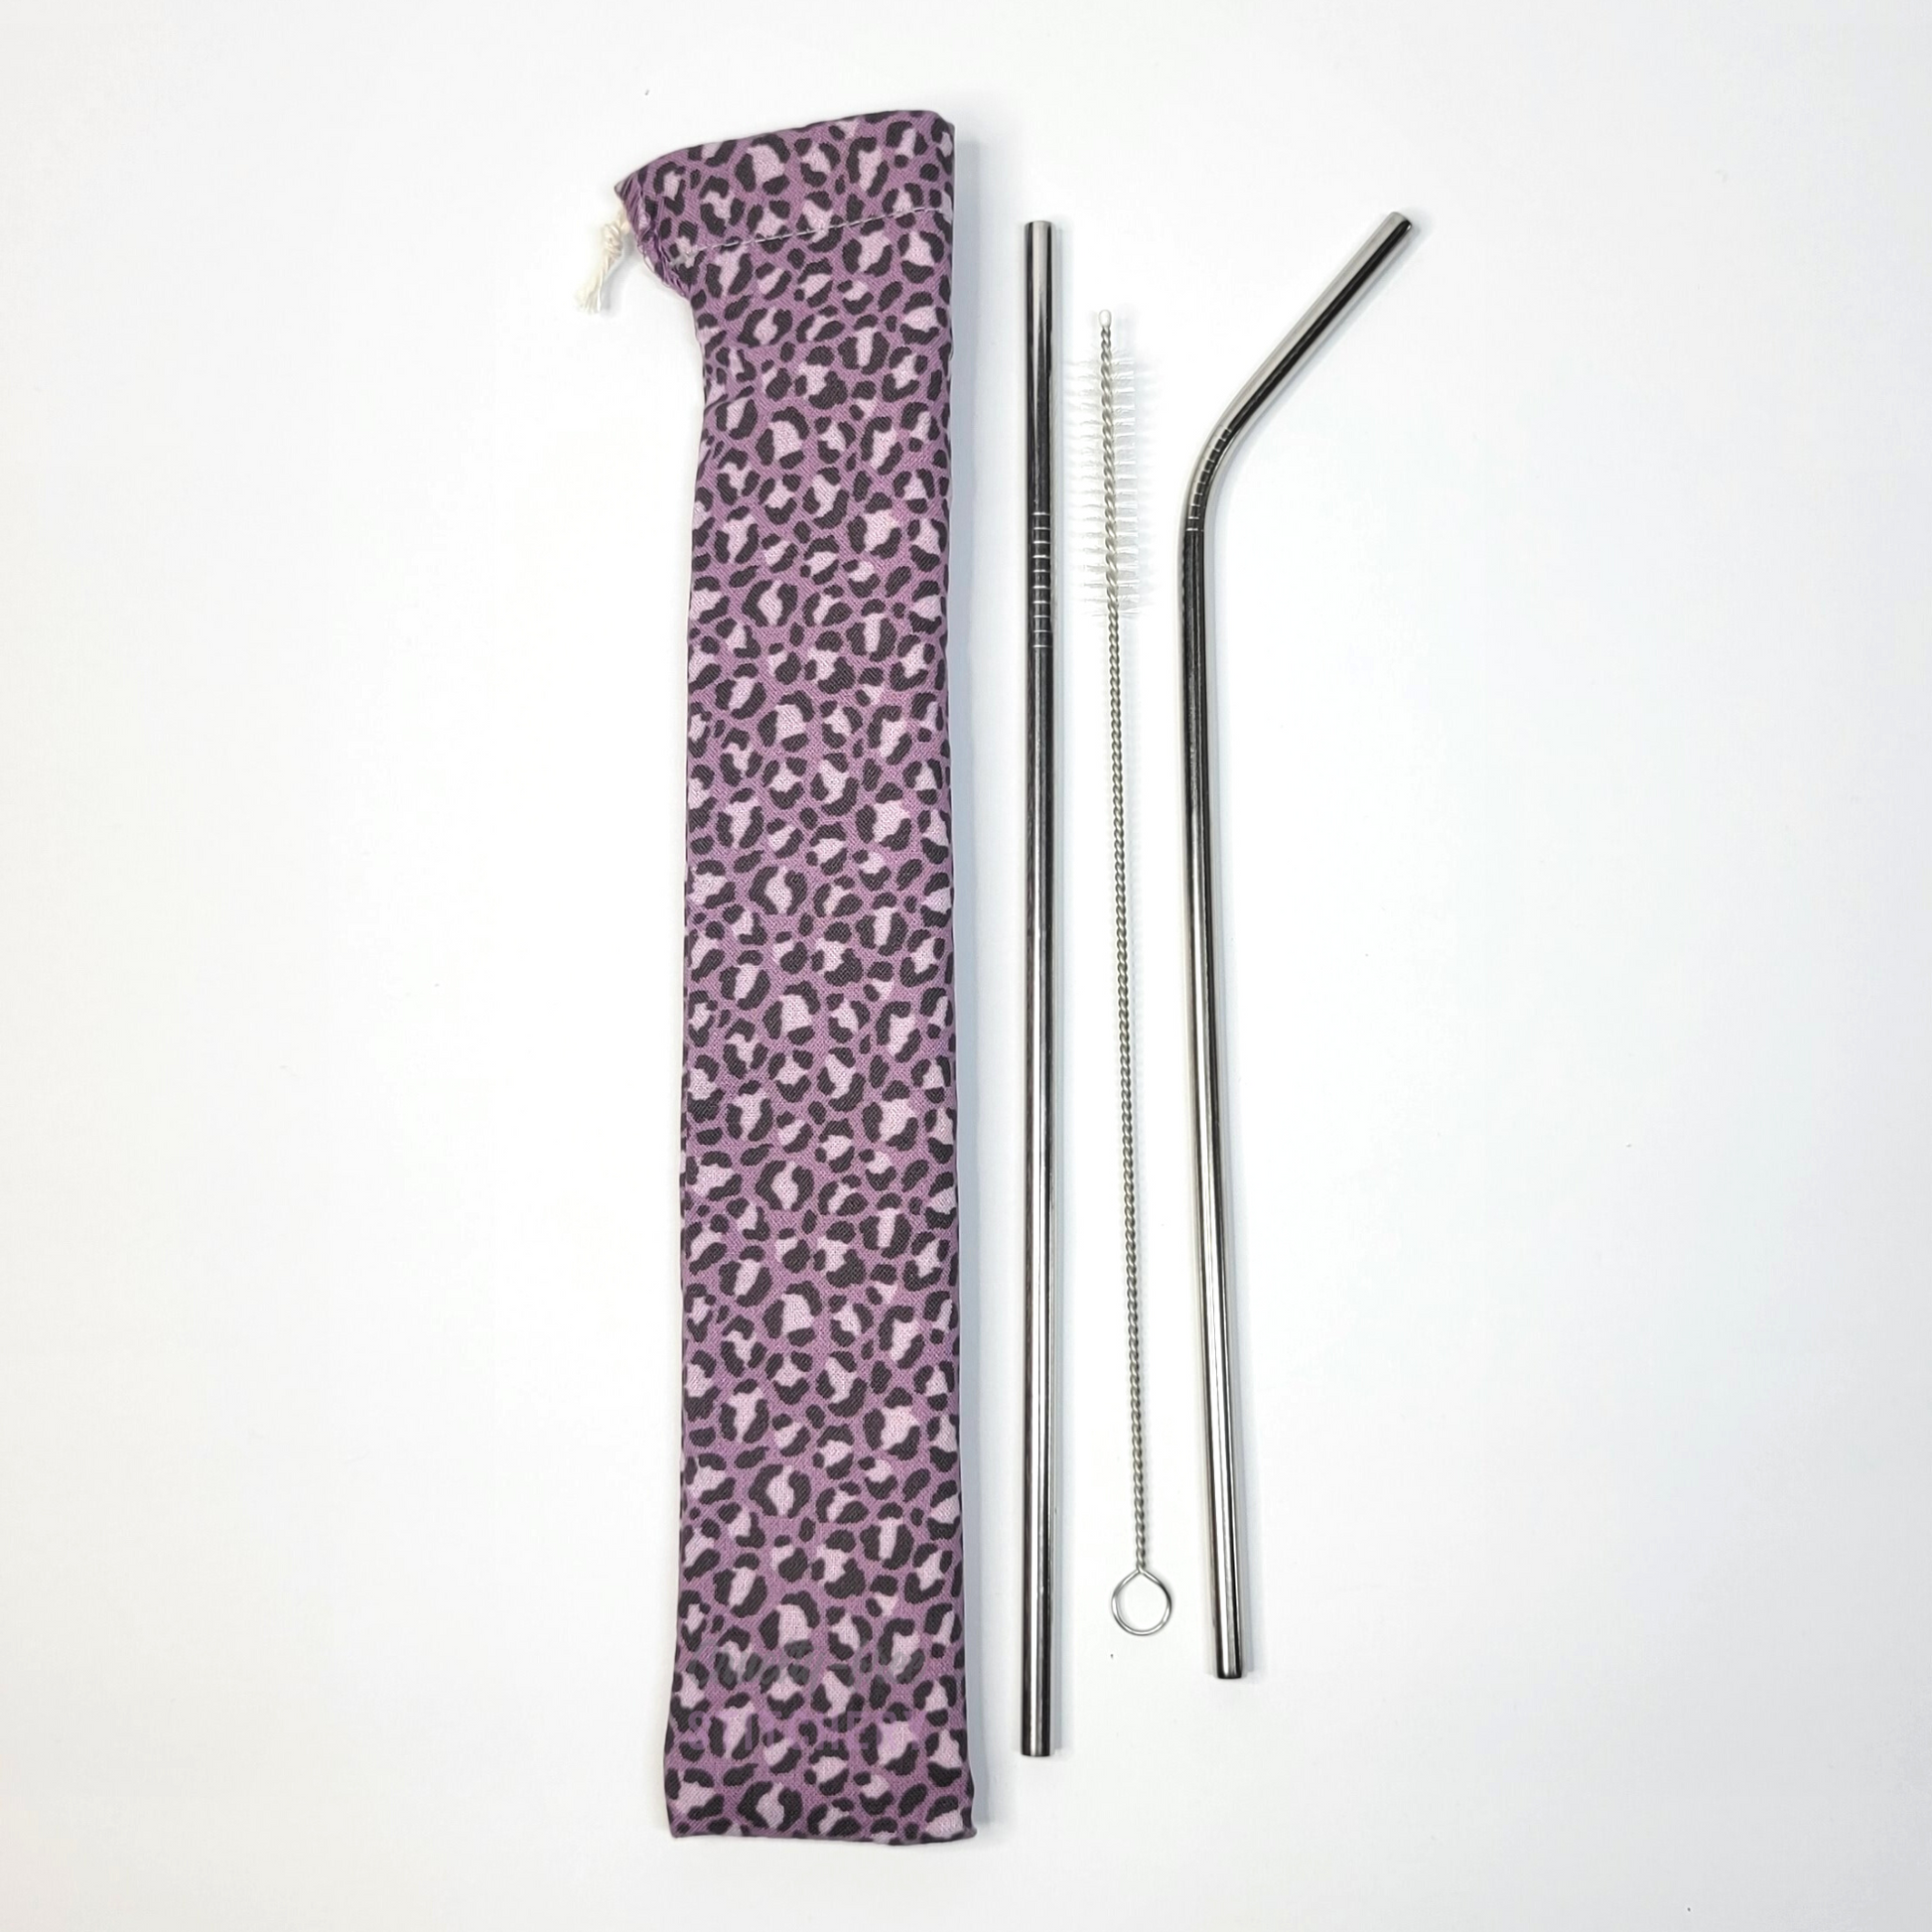 Reusable straw pouch in the same violet leopard print laying vertically next to a straw cleaner brush, a straight stainless steel straw, and a bent stainless steel straw.